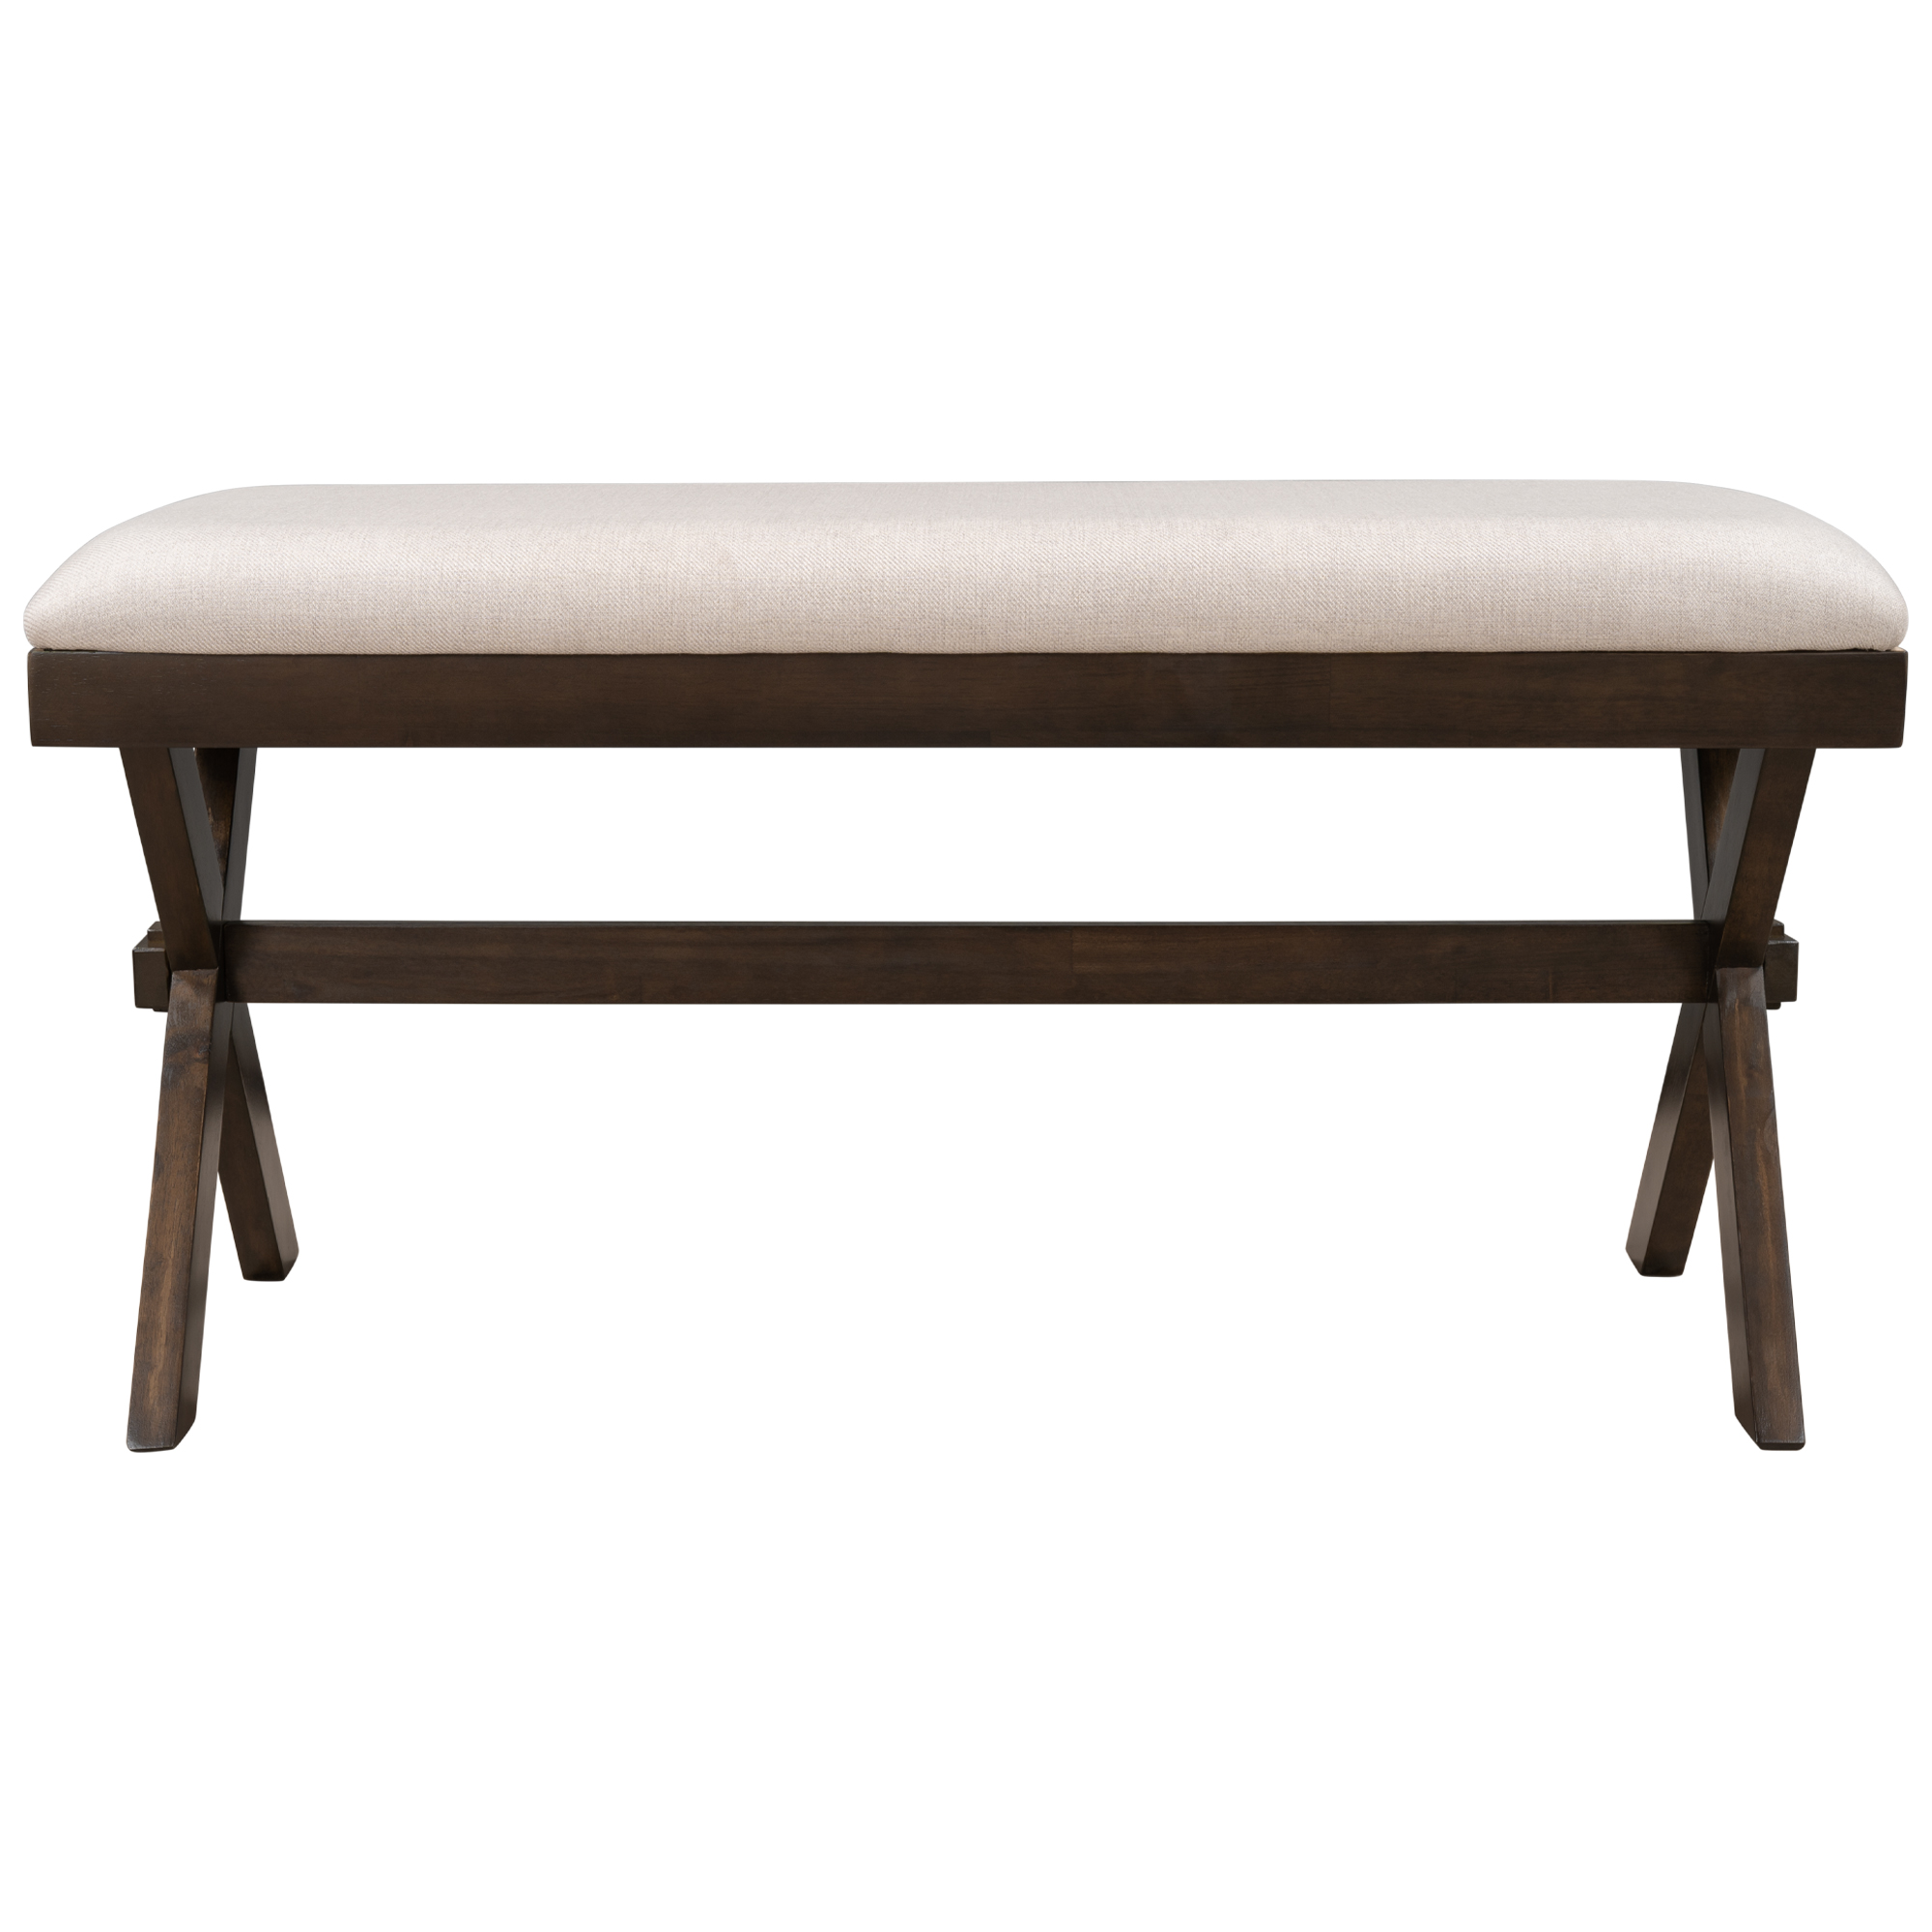 Farmhouse Rustic Wood Kitchen Upholstered Dining Bench, Brown+ Beige-Boyel Living